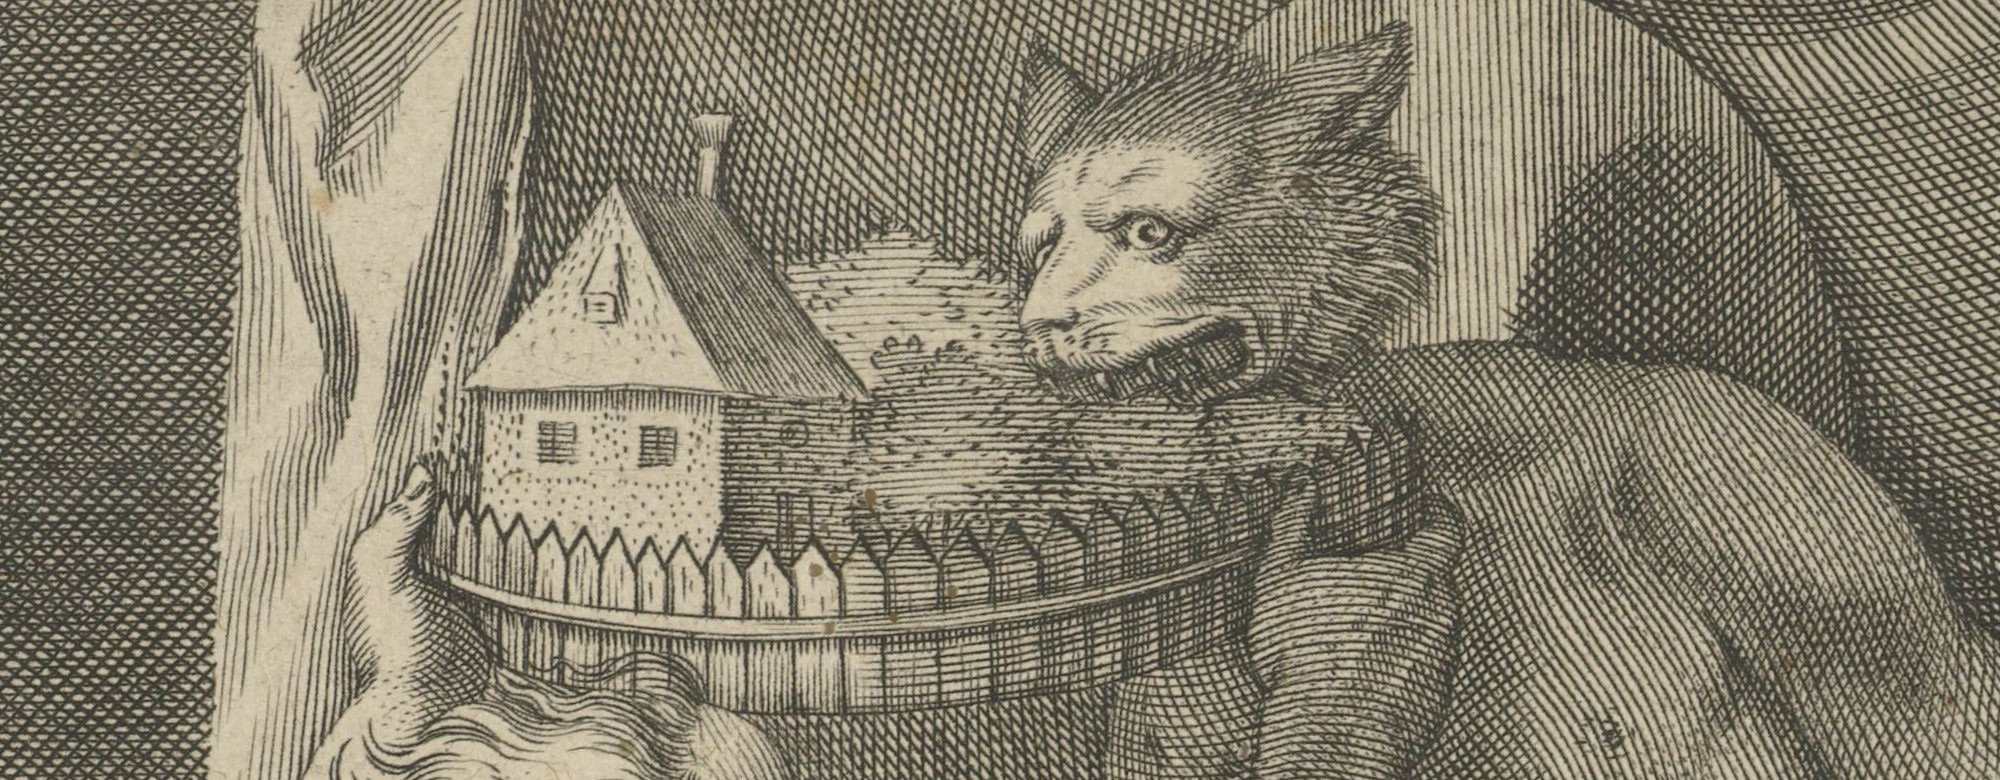 Cropped engraving of an allgegory on the abuse of property rights by Cornelis Galle (I).